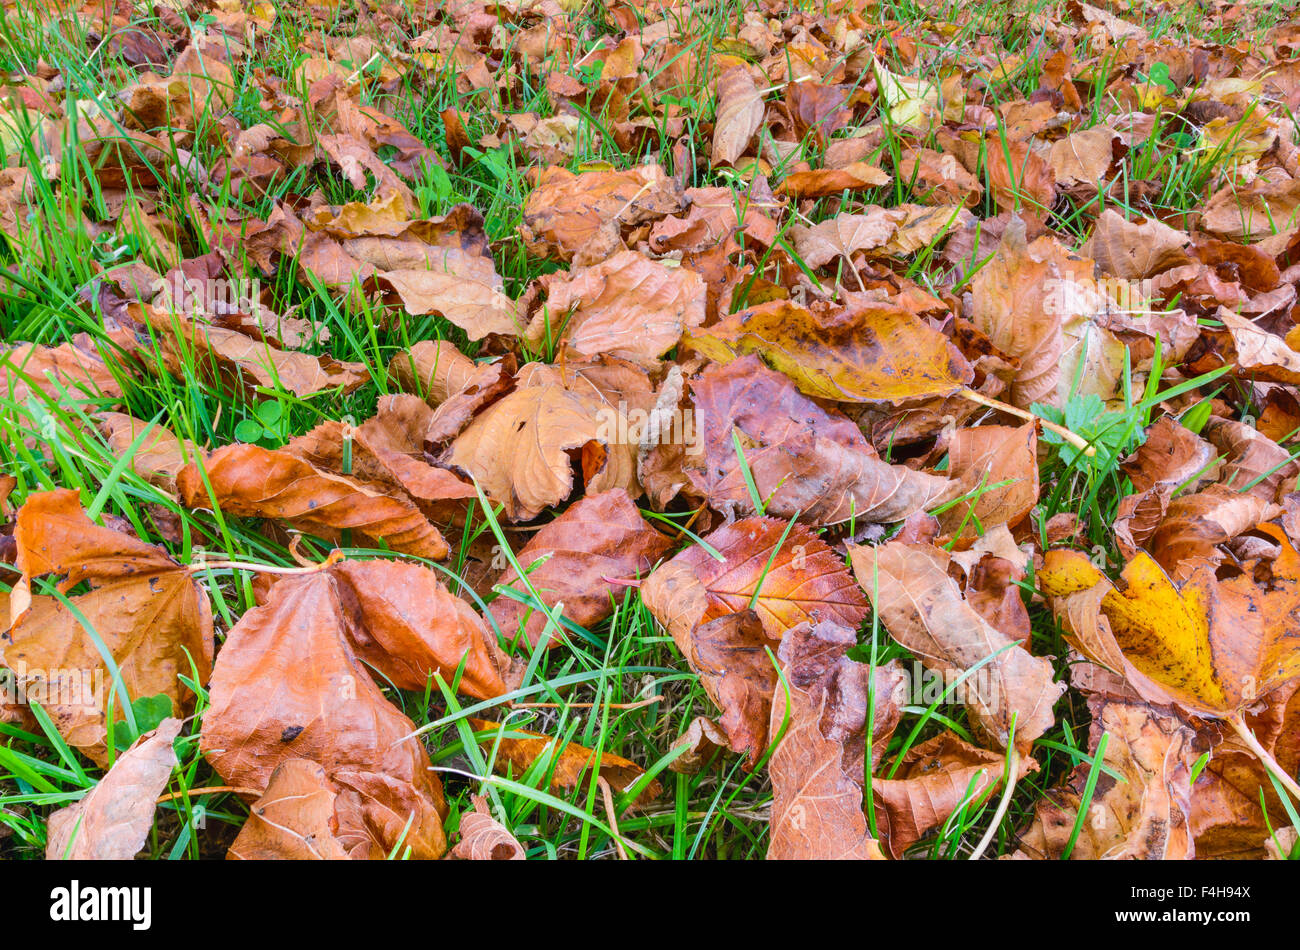 Autumn leaves laying on the ground after falling off trees. Stock Photo